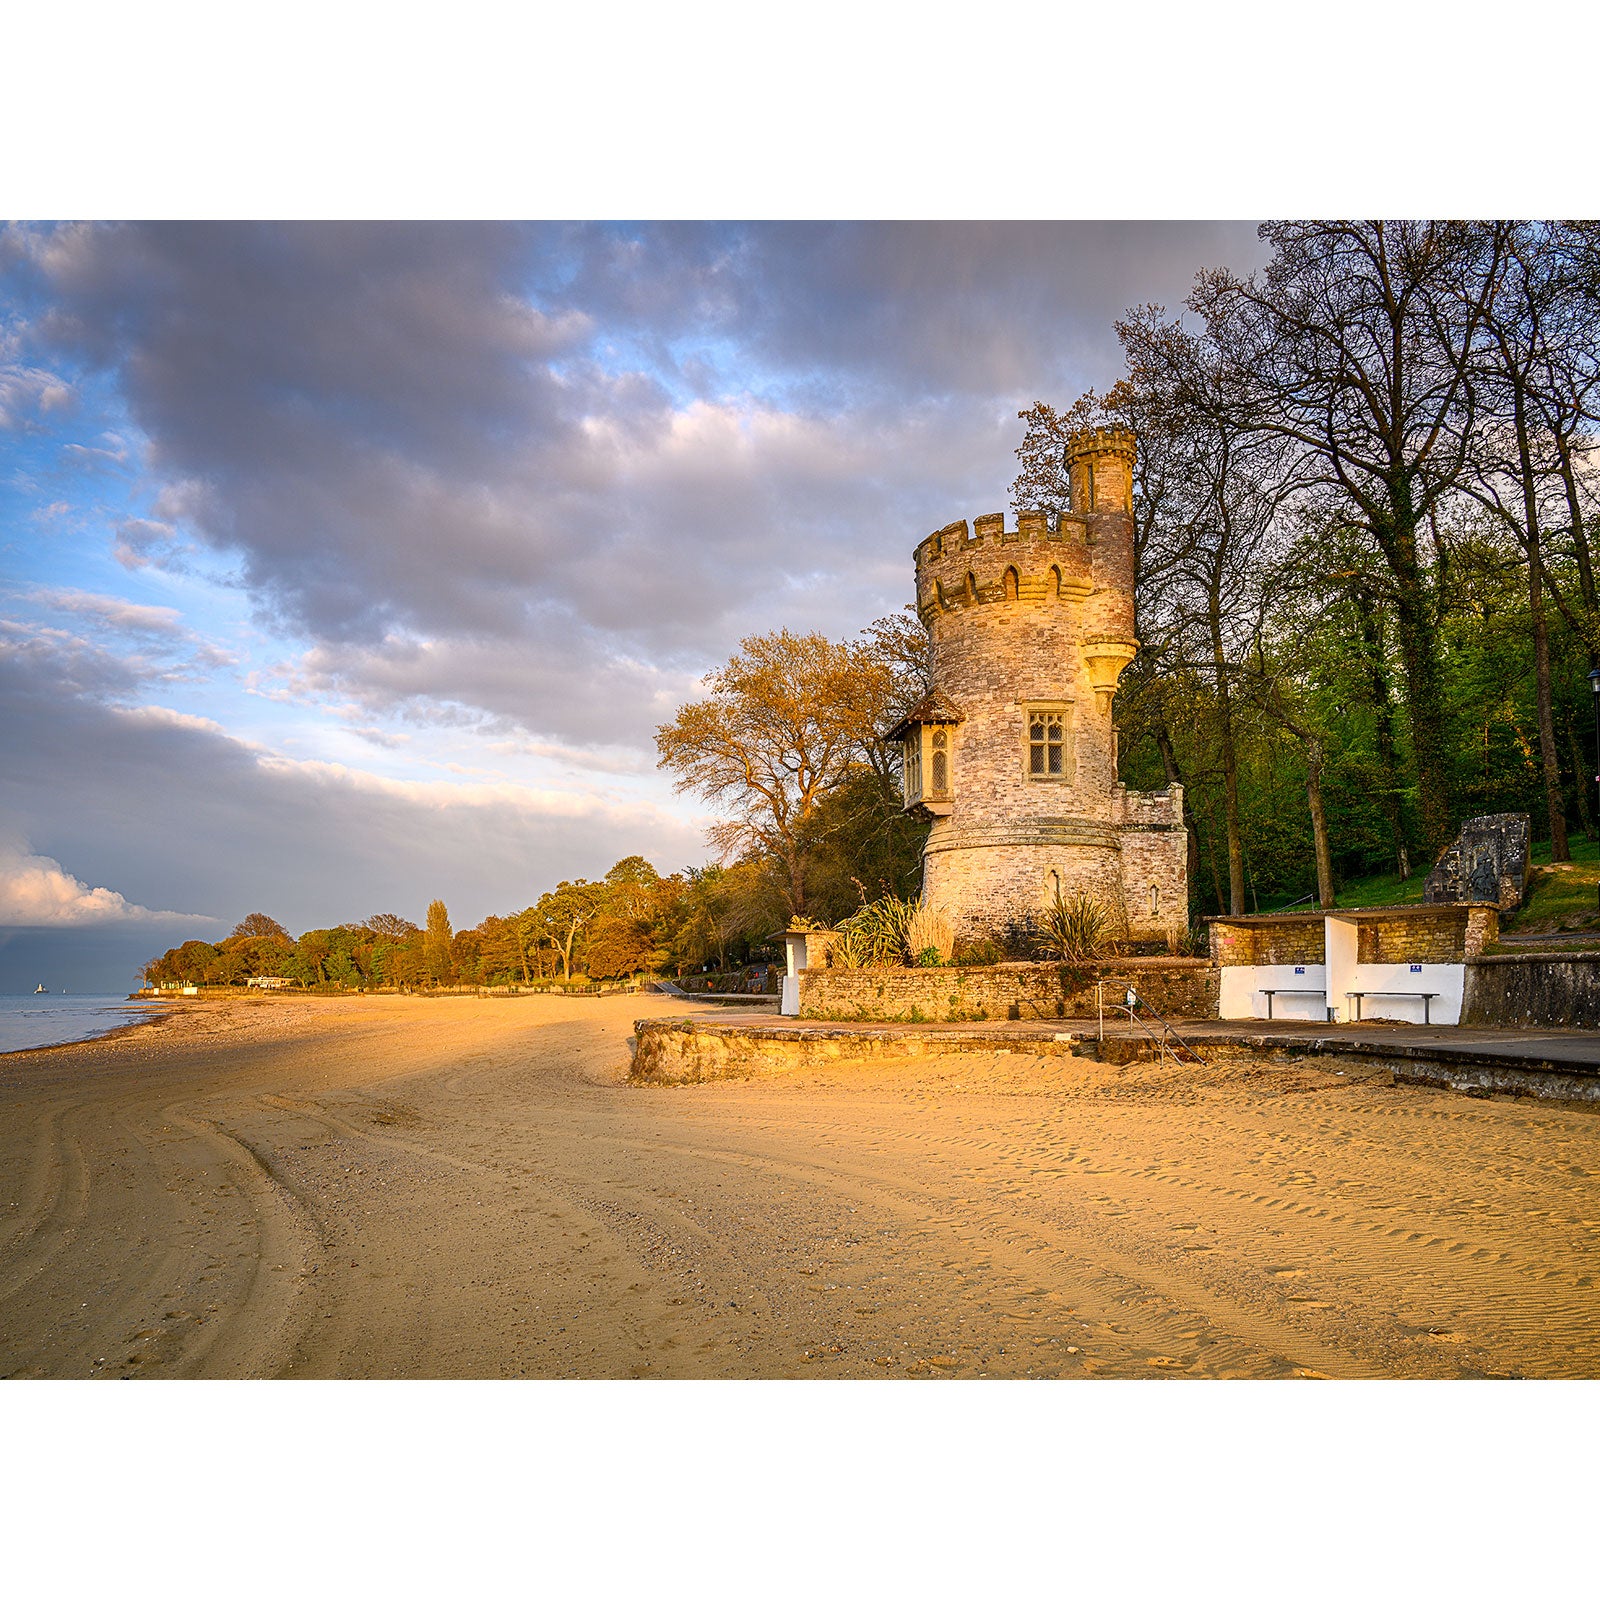 A historic Appley Tower stands adjacent to a sandy beach on the Isle of Wight with a backdrop of trees under a partly cloudy sky.